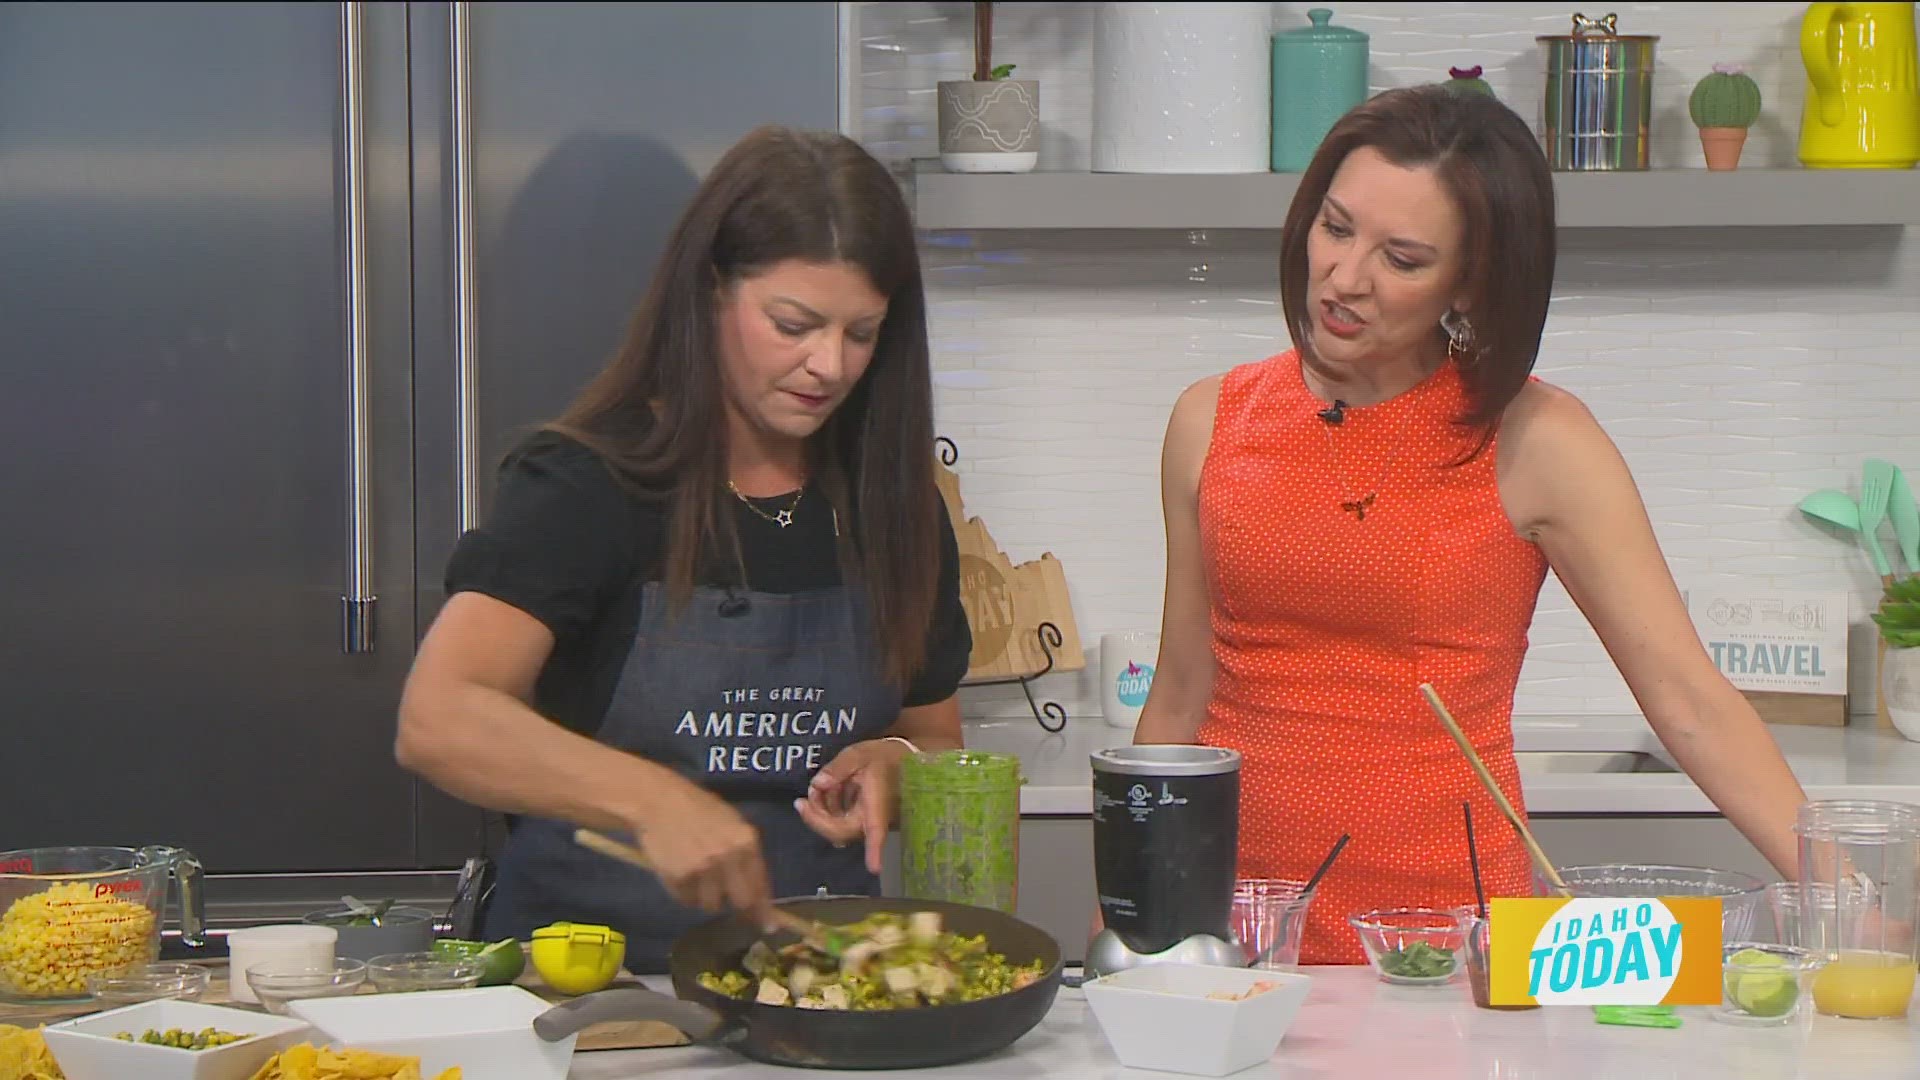 Chef Nikki gives great tips and ideas on how to keep party food budget friendly and something everyone can enjoy.